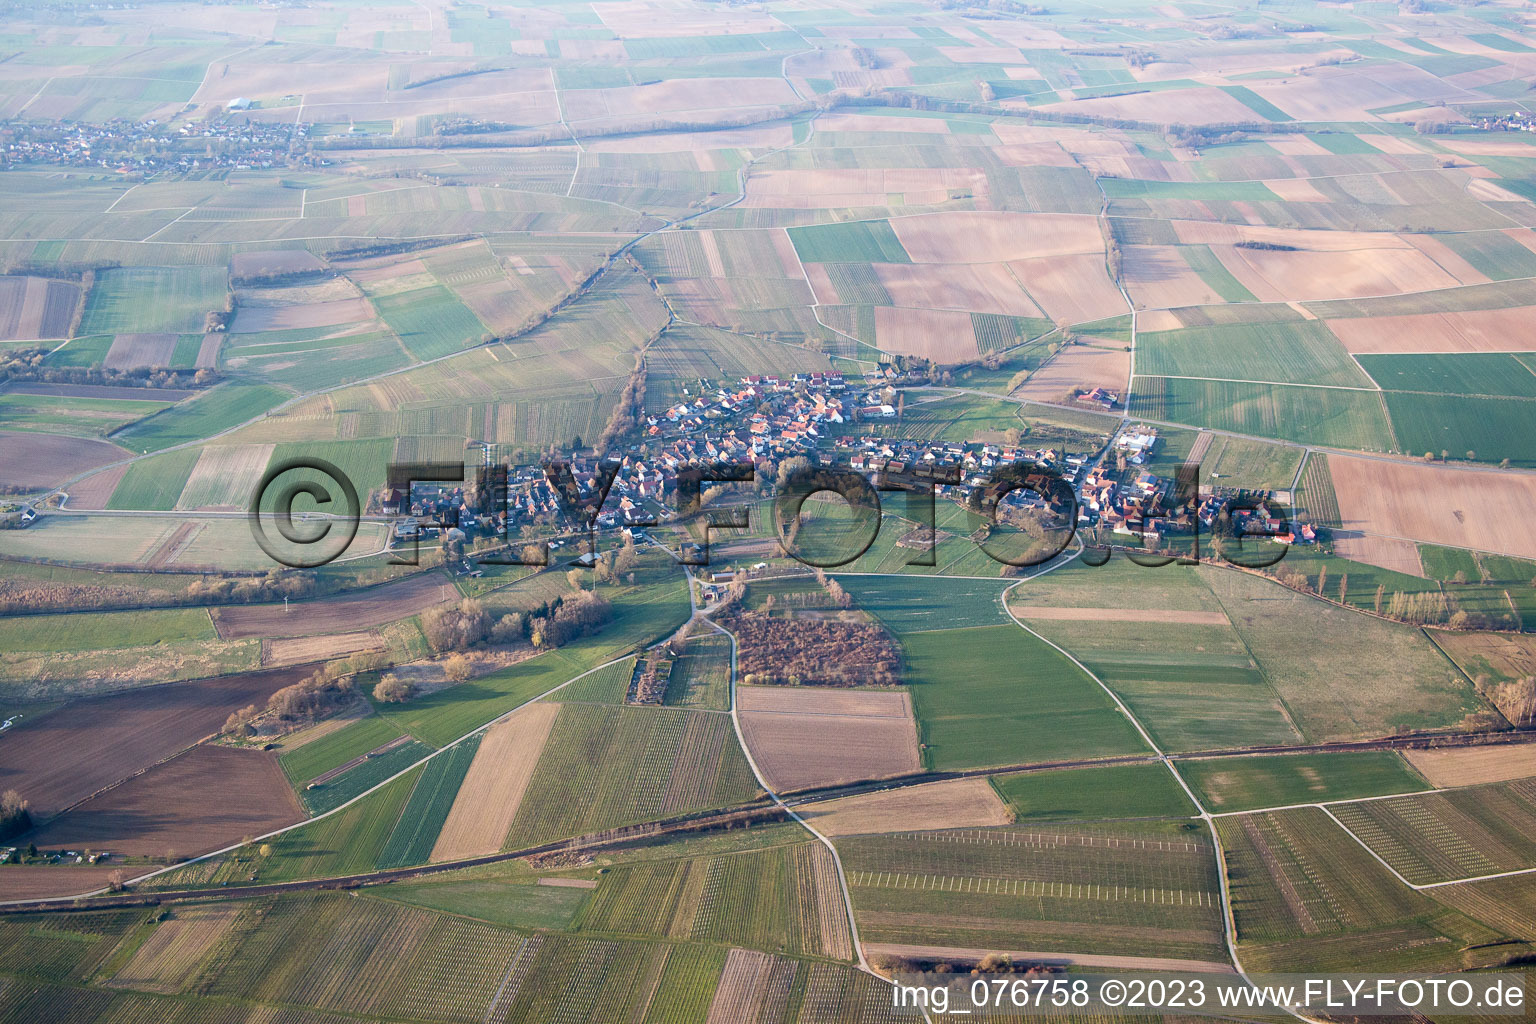 Oblique view of Oberhausen in the state Rhineland-Palatinate, Germany